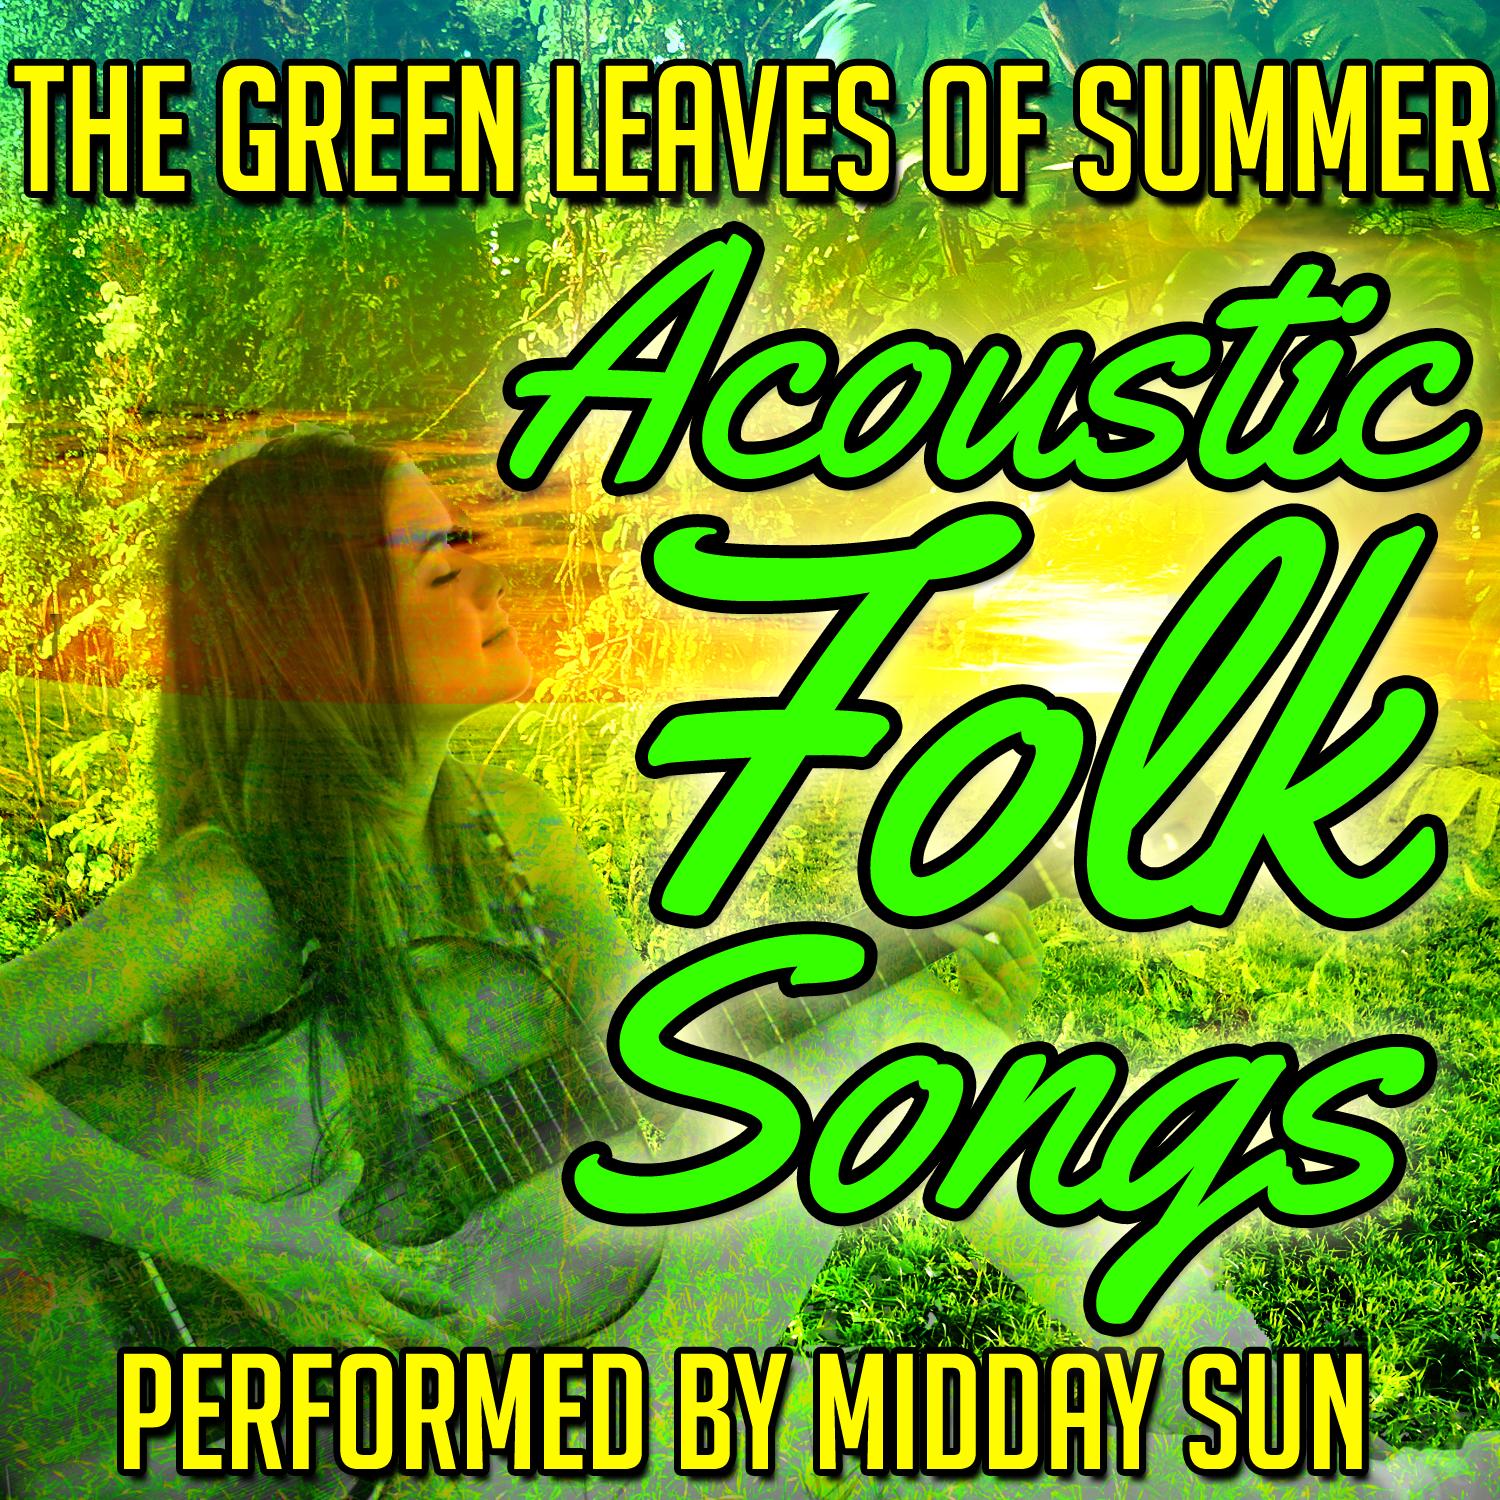 The Green Leaves of Summer: Acoustic Folk Songs